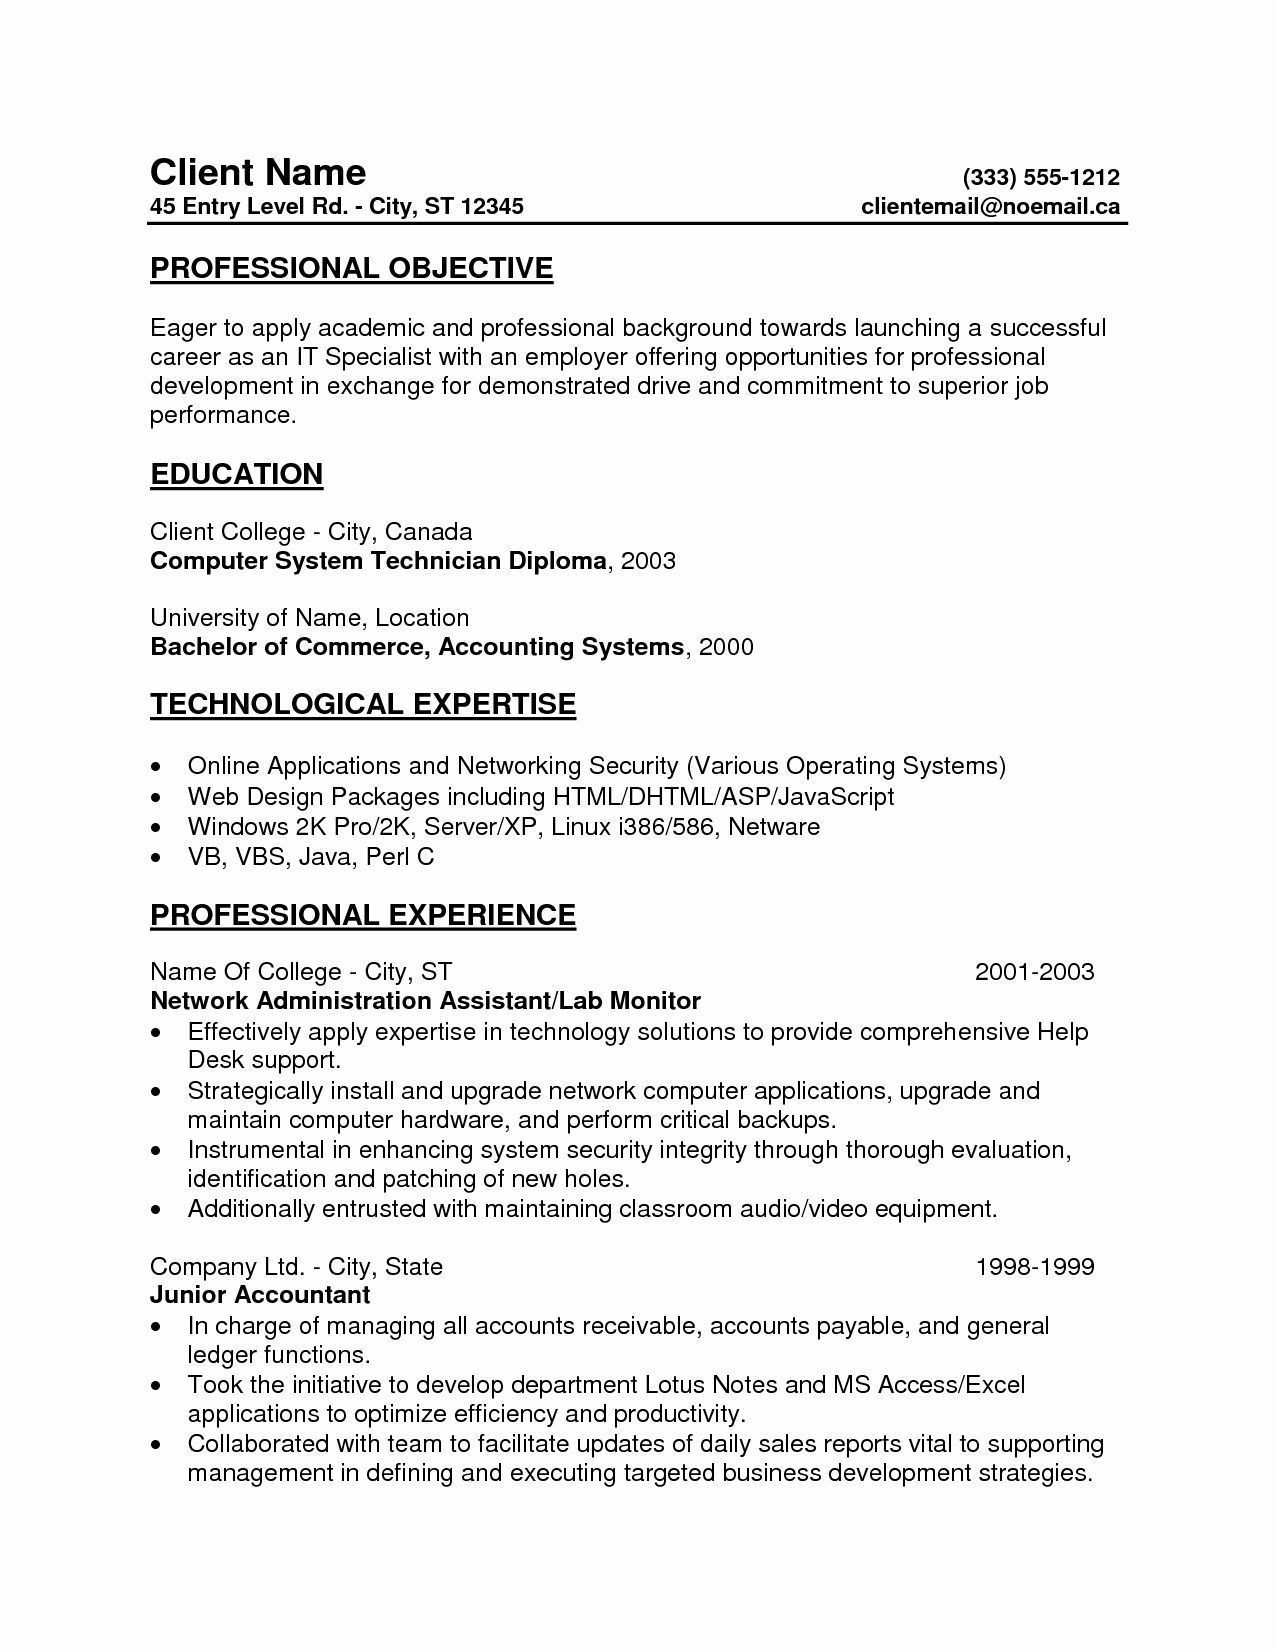 Resume Objective Samples for Experienced Professionals Professional Resume Objective Examples